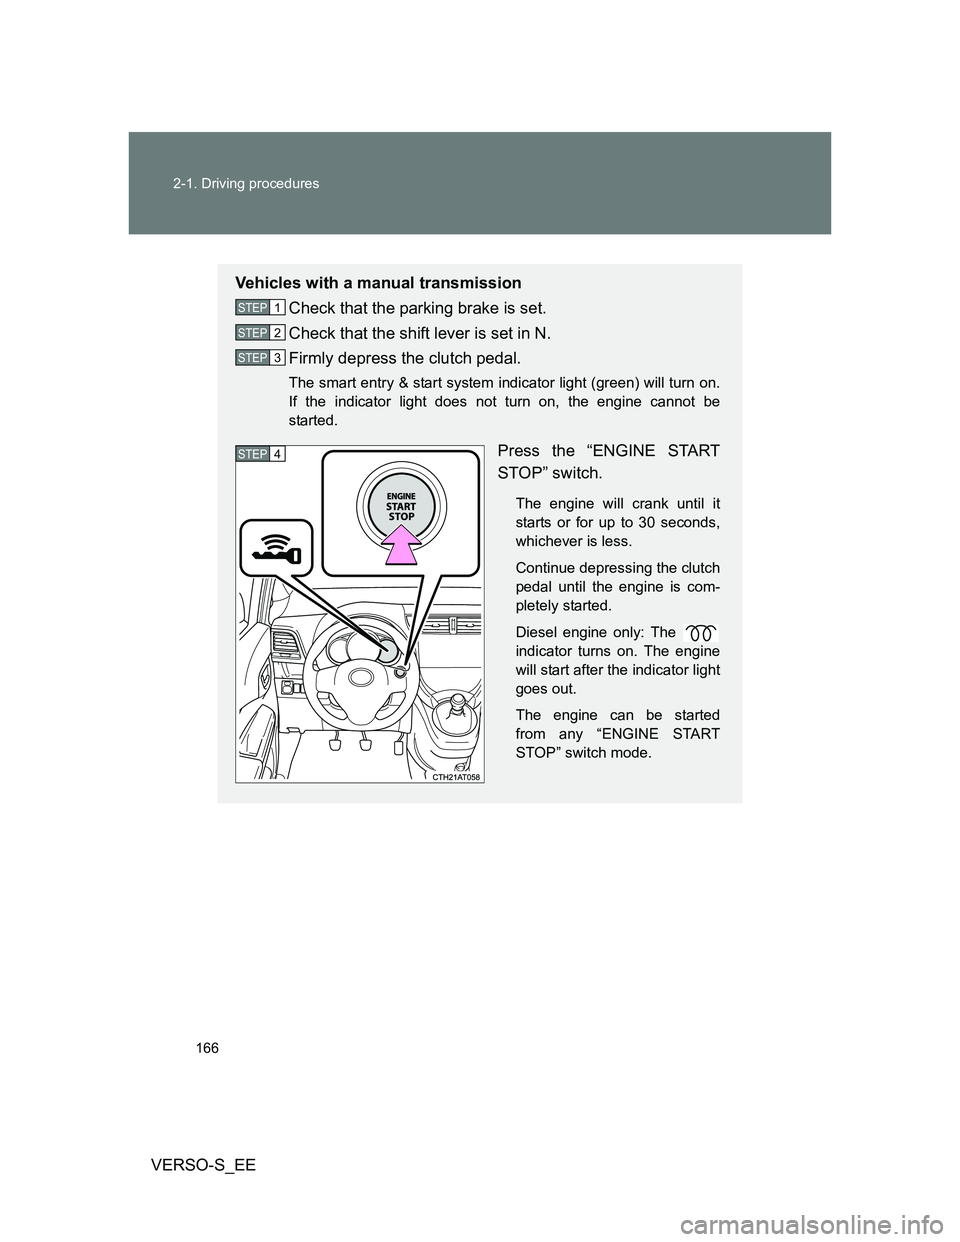 TOYOTA VERSO S 2013  Owners Manual 166 2-1. Driving procedures
VERSO-S_EE
Vehicles with a manual transmission
Check that the parking brake is set.
Check that the shift lever is set in N.
Firmly depress the clutch pedal.
The smart entry